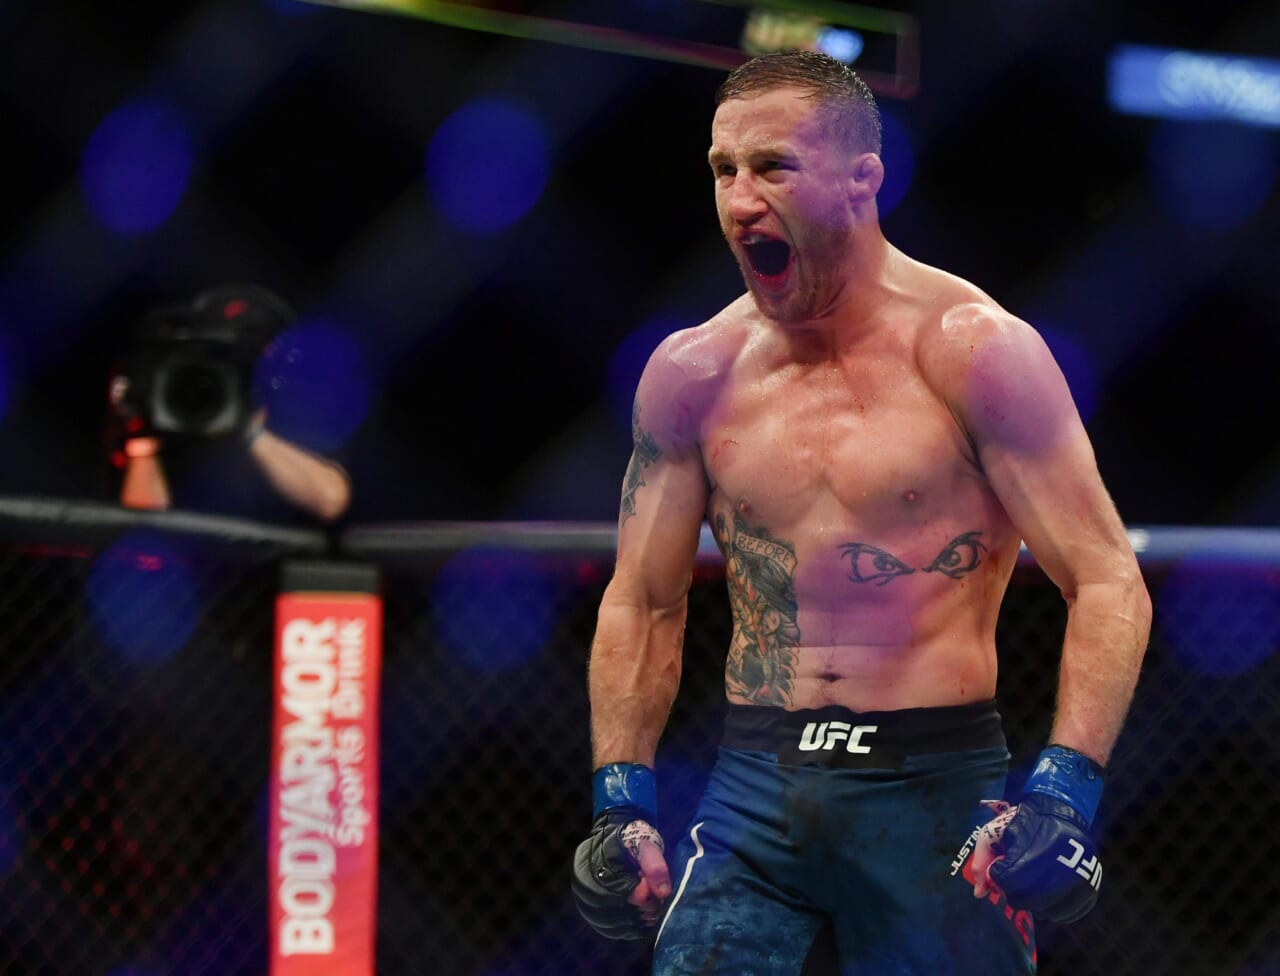 What’s next for Justin Gaethje after UFC 254?